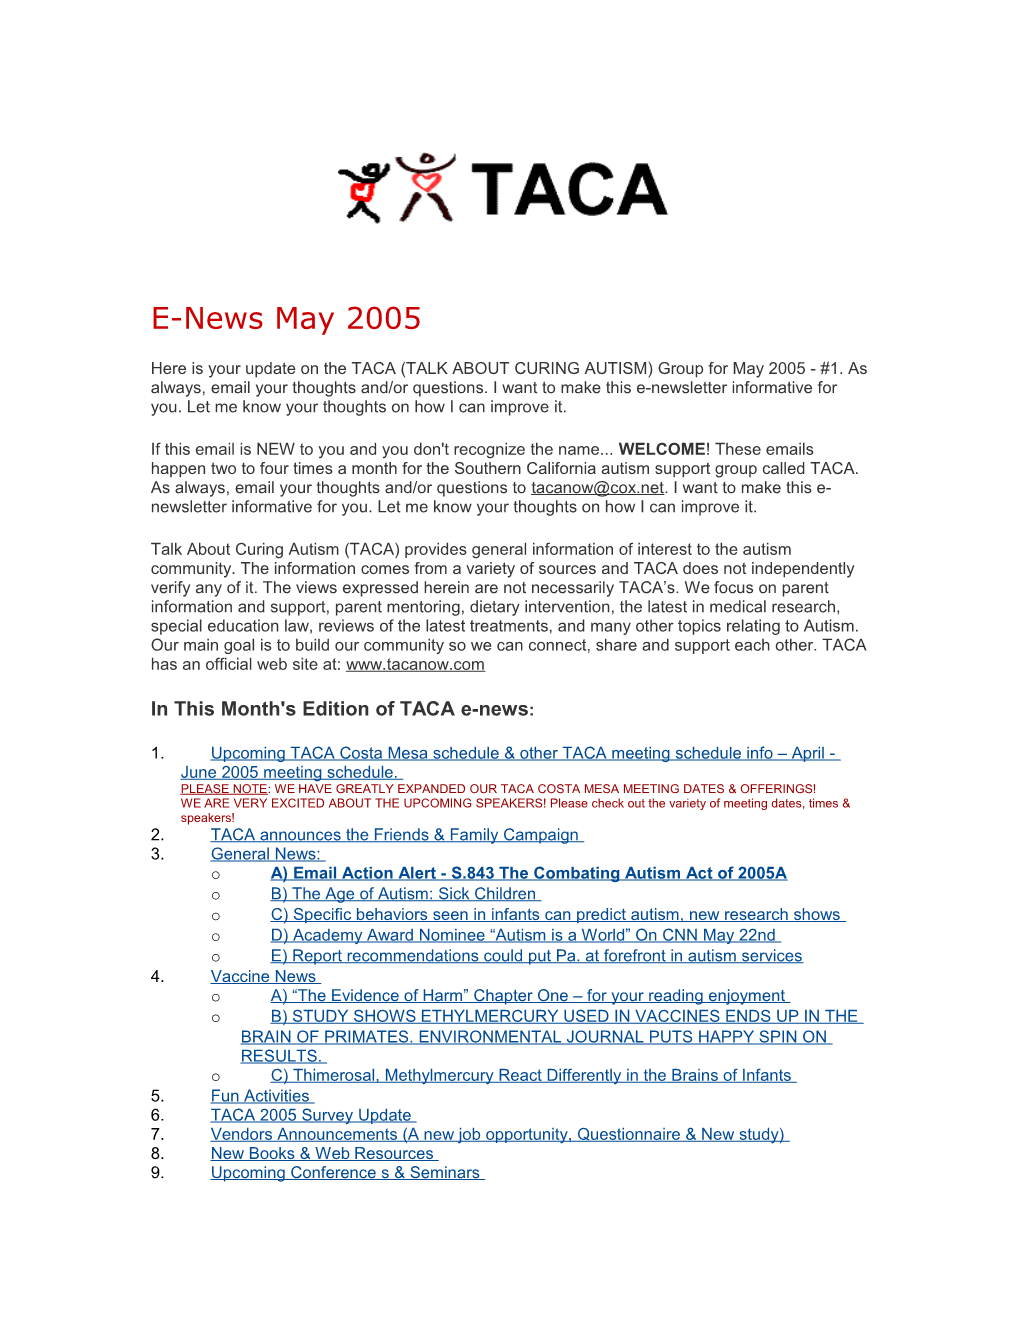 In This Month's Edition of TACA E-News